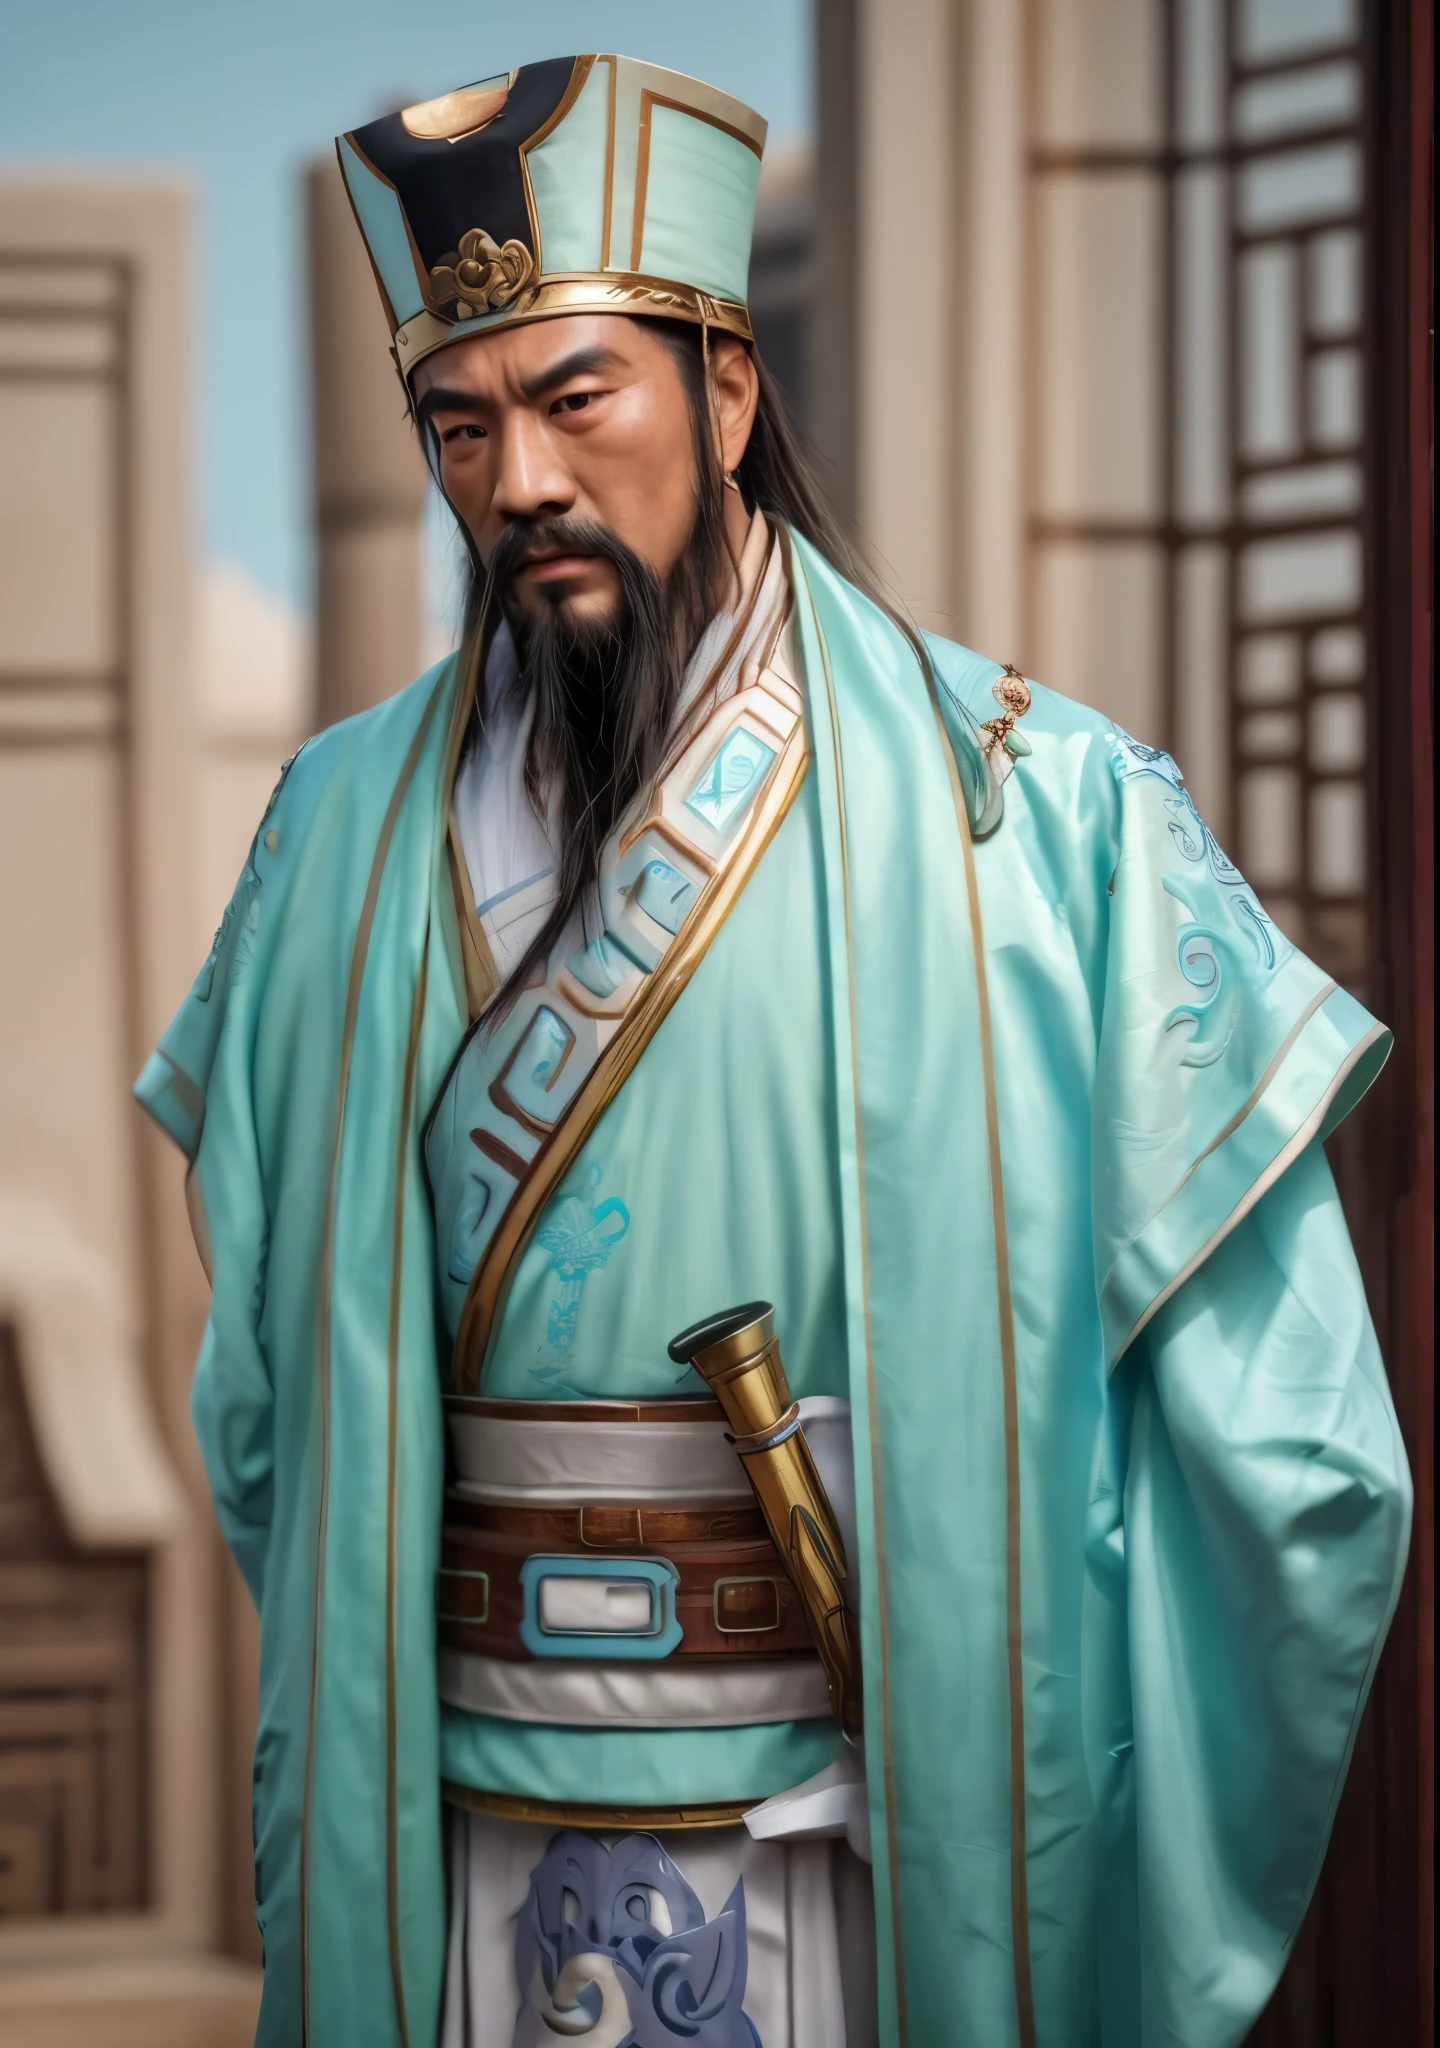 Close-up of a man wearing turquoise and white clothing, Inspired by Dong Yuan, inspired by Cao Zhibai, Inspired by Wu Bin, Inspired by Hu Zaobin, Inspired by Emperor Xuande, Inspired by Li Kan, Inspired by Huang Ding, inspired by Wu Daozi, Inspired by Zhang Lu, Inspired by Zhang Sengyao